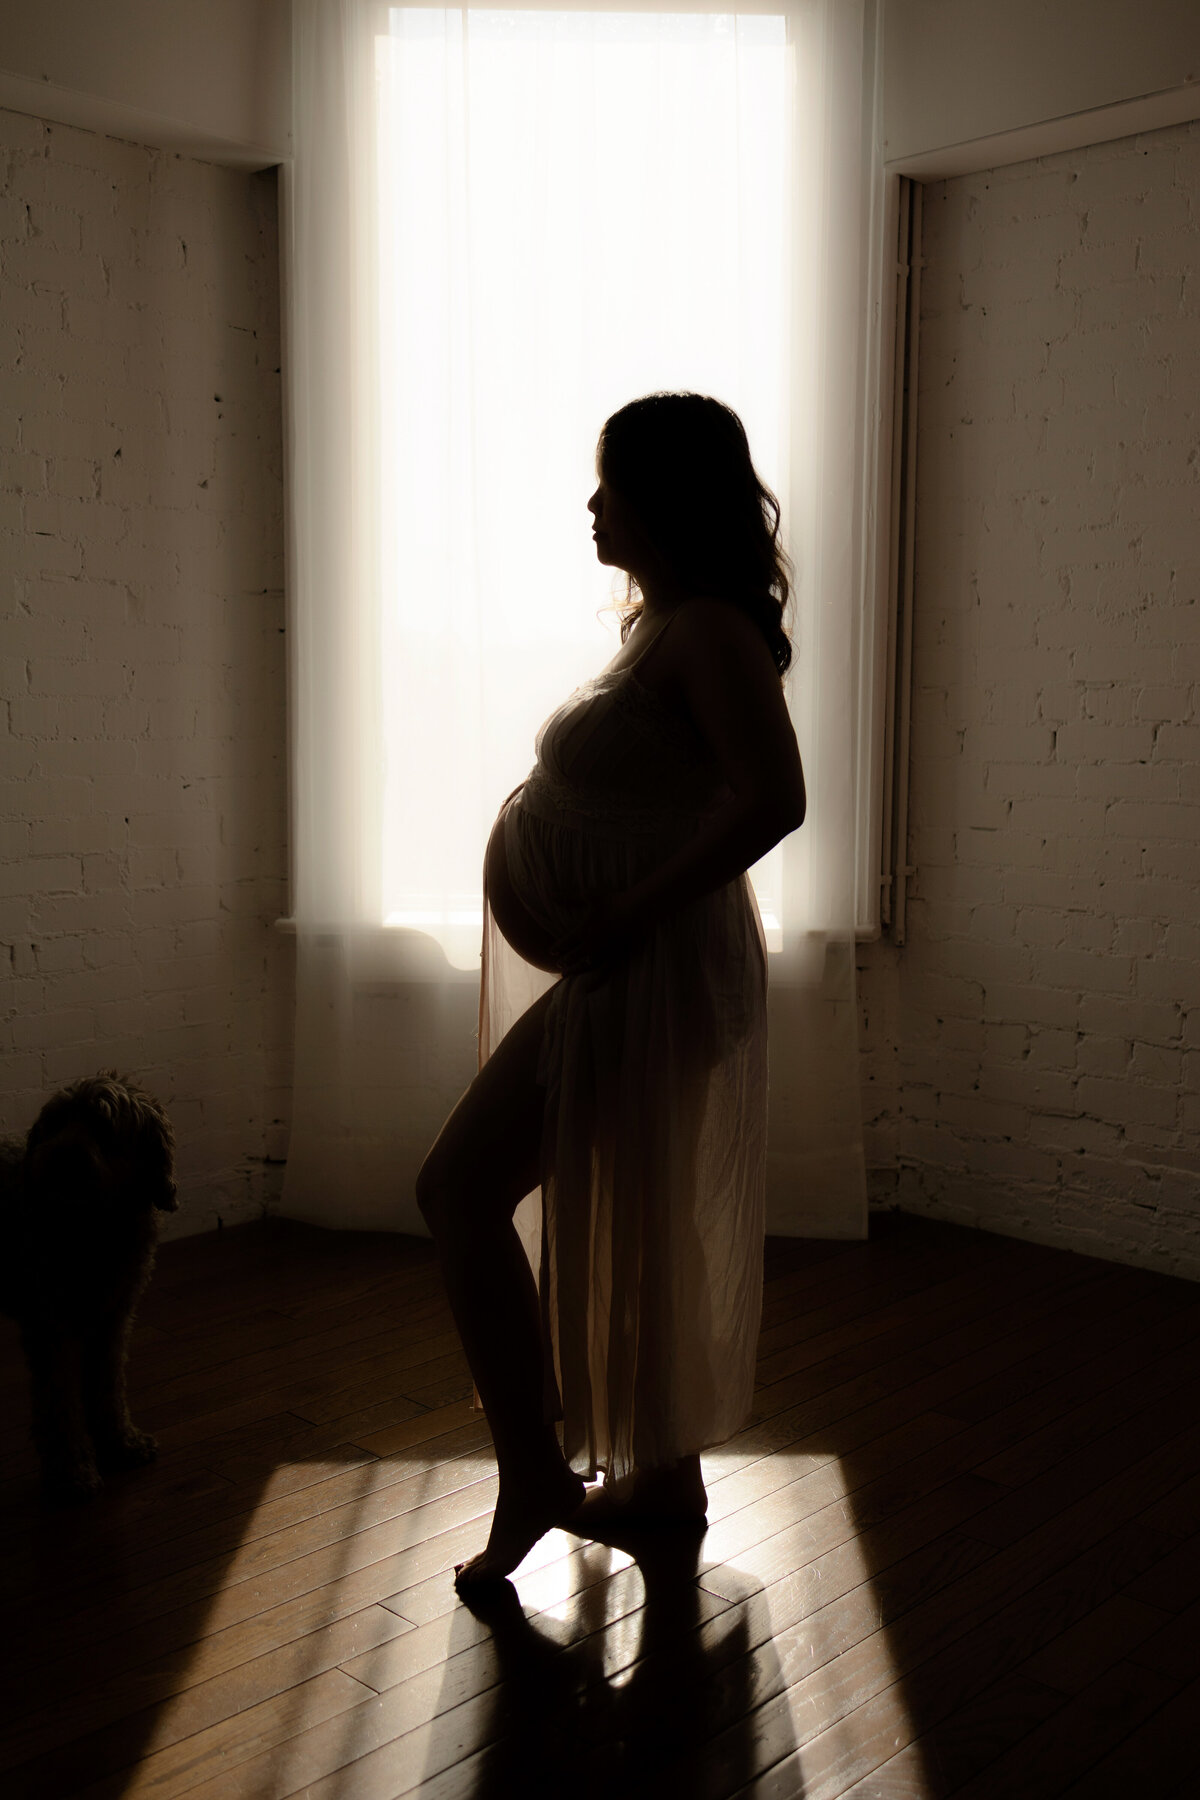 Let me create maternity memories with the artistry of Haley Skof Photography in Calgary. Your journey to motherhood is worth cherishing in stunning photographs.